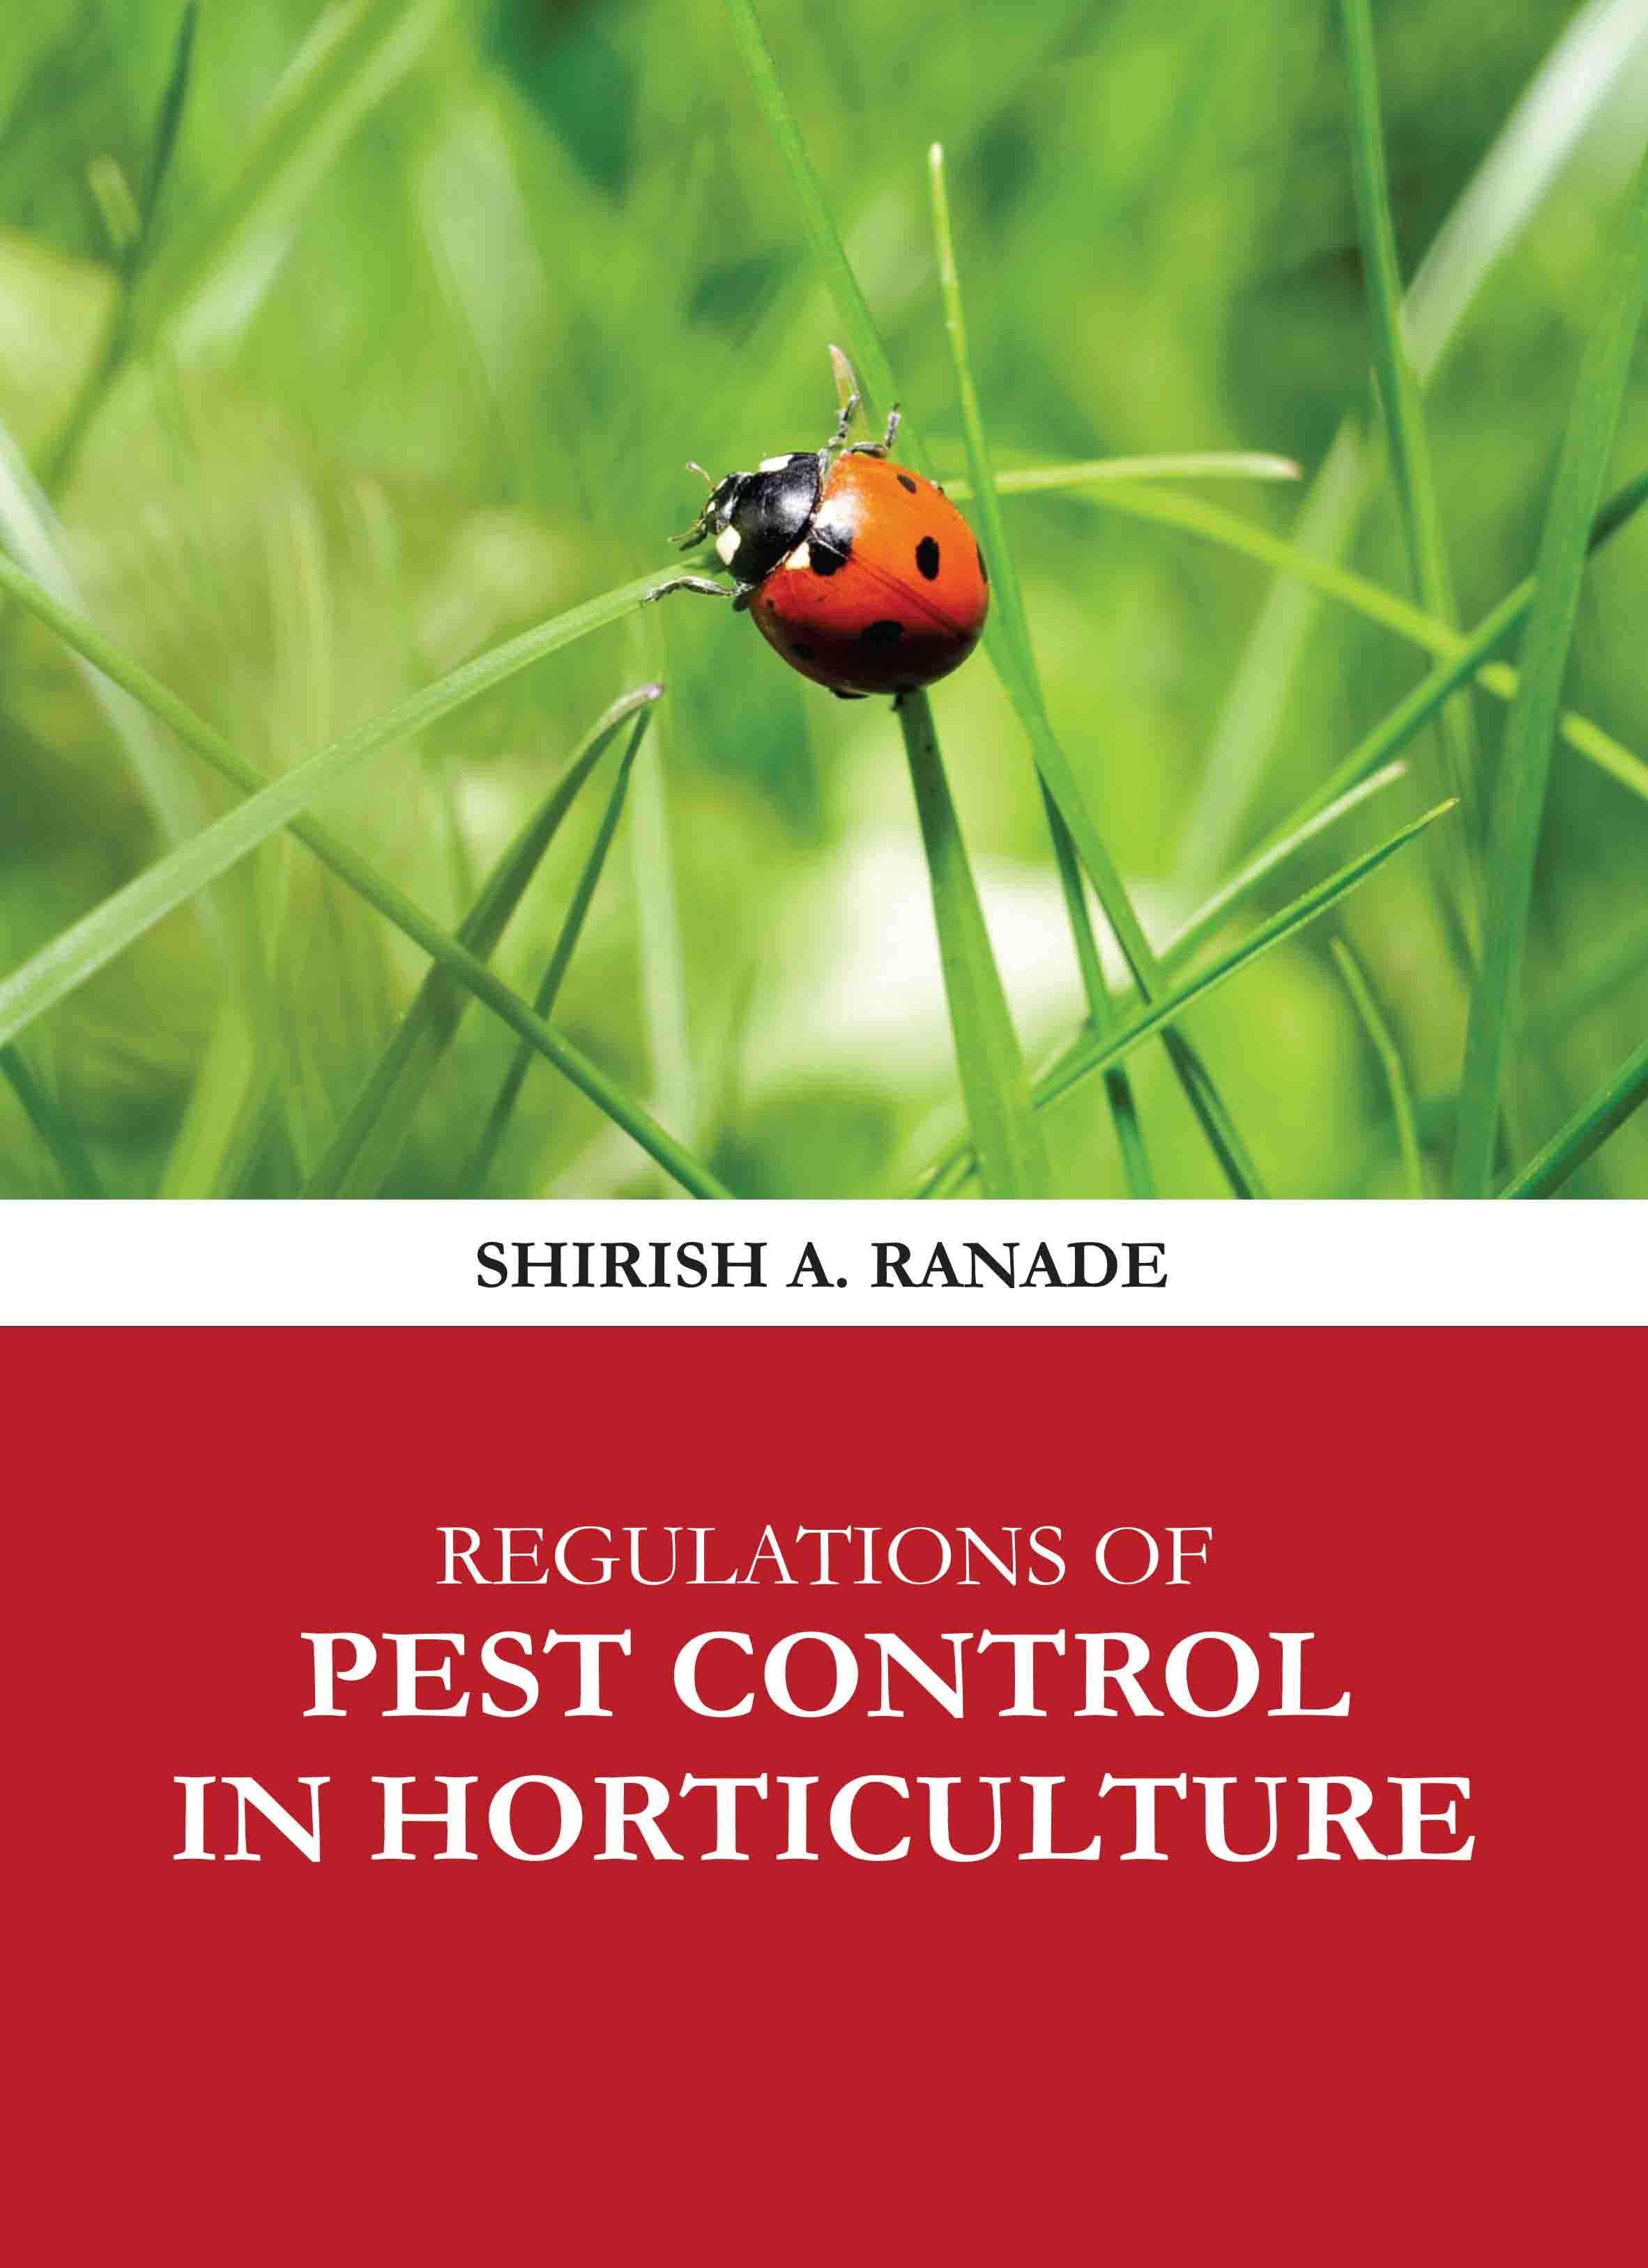 Regulations of Pest Control in Horticulture